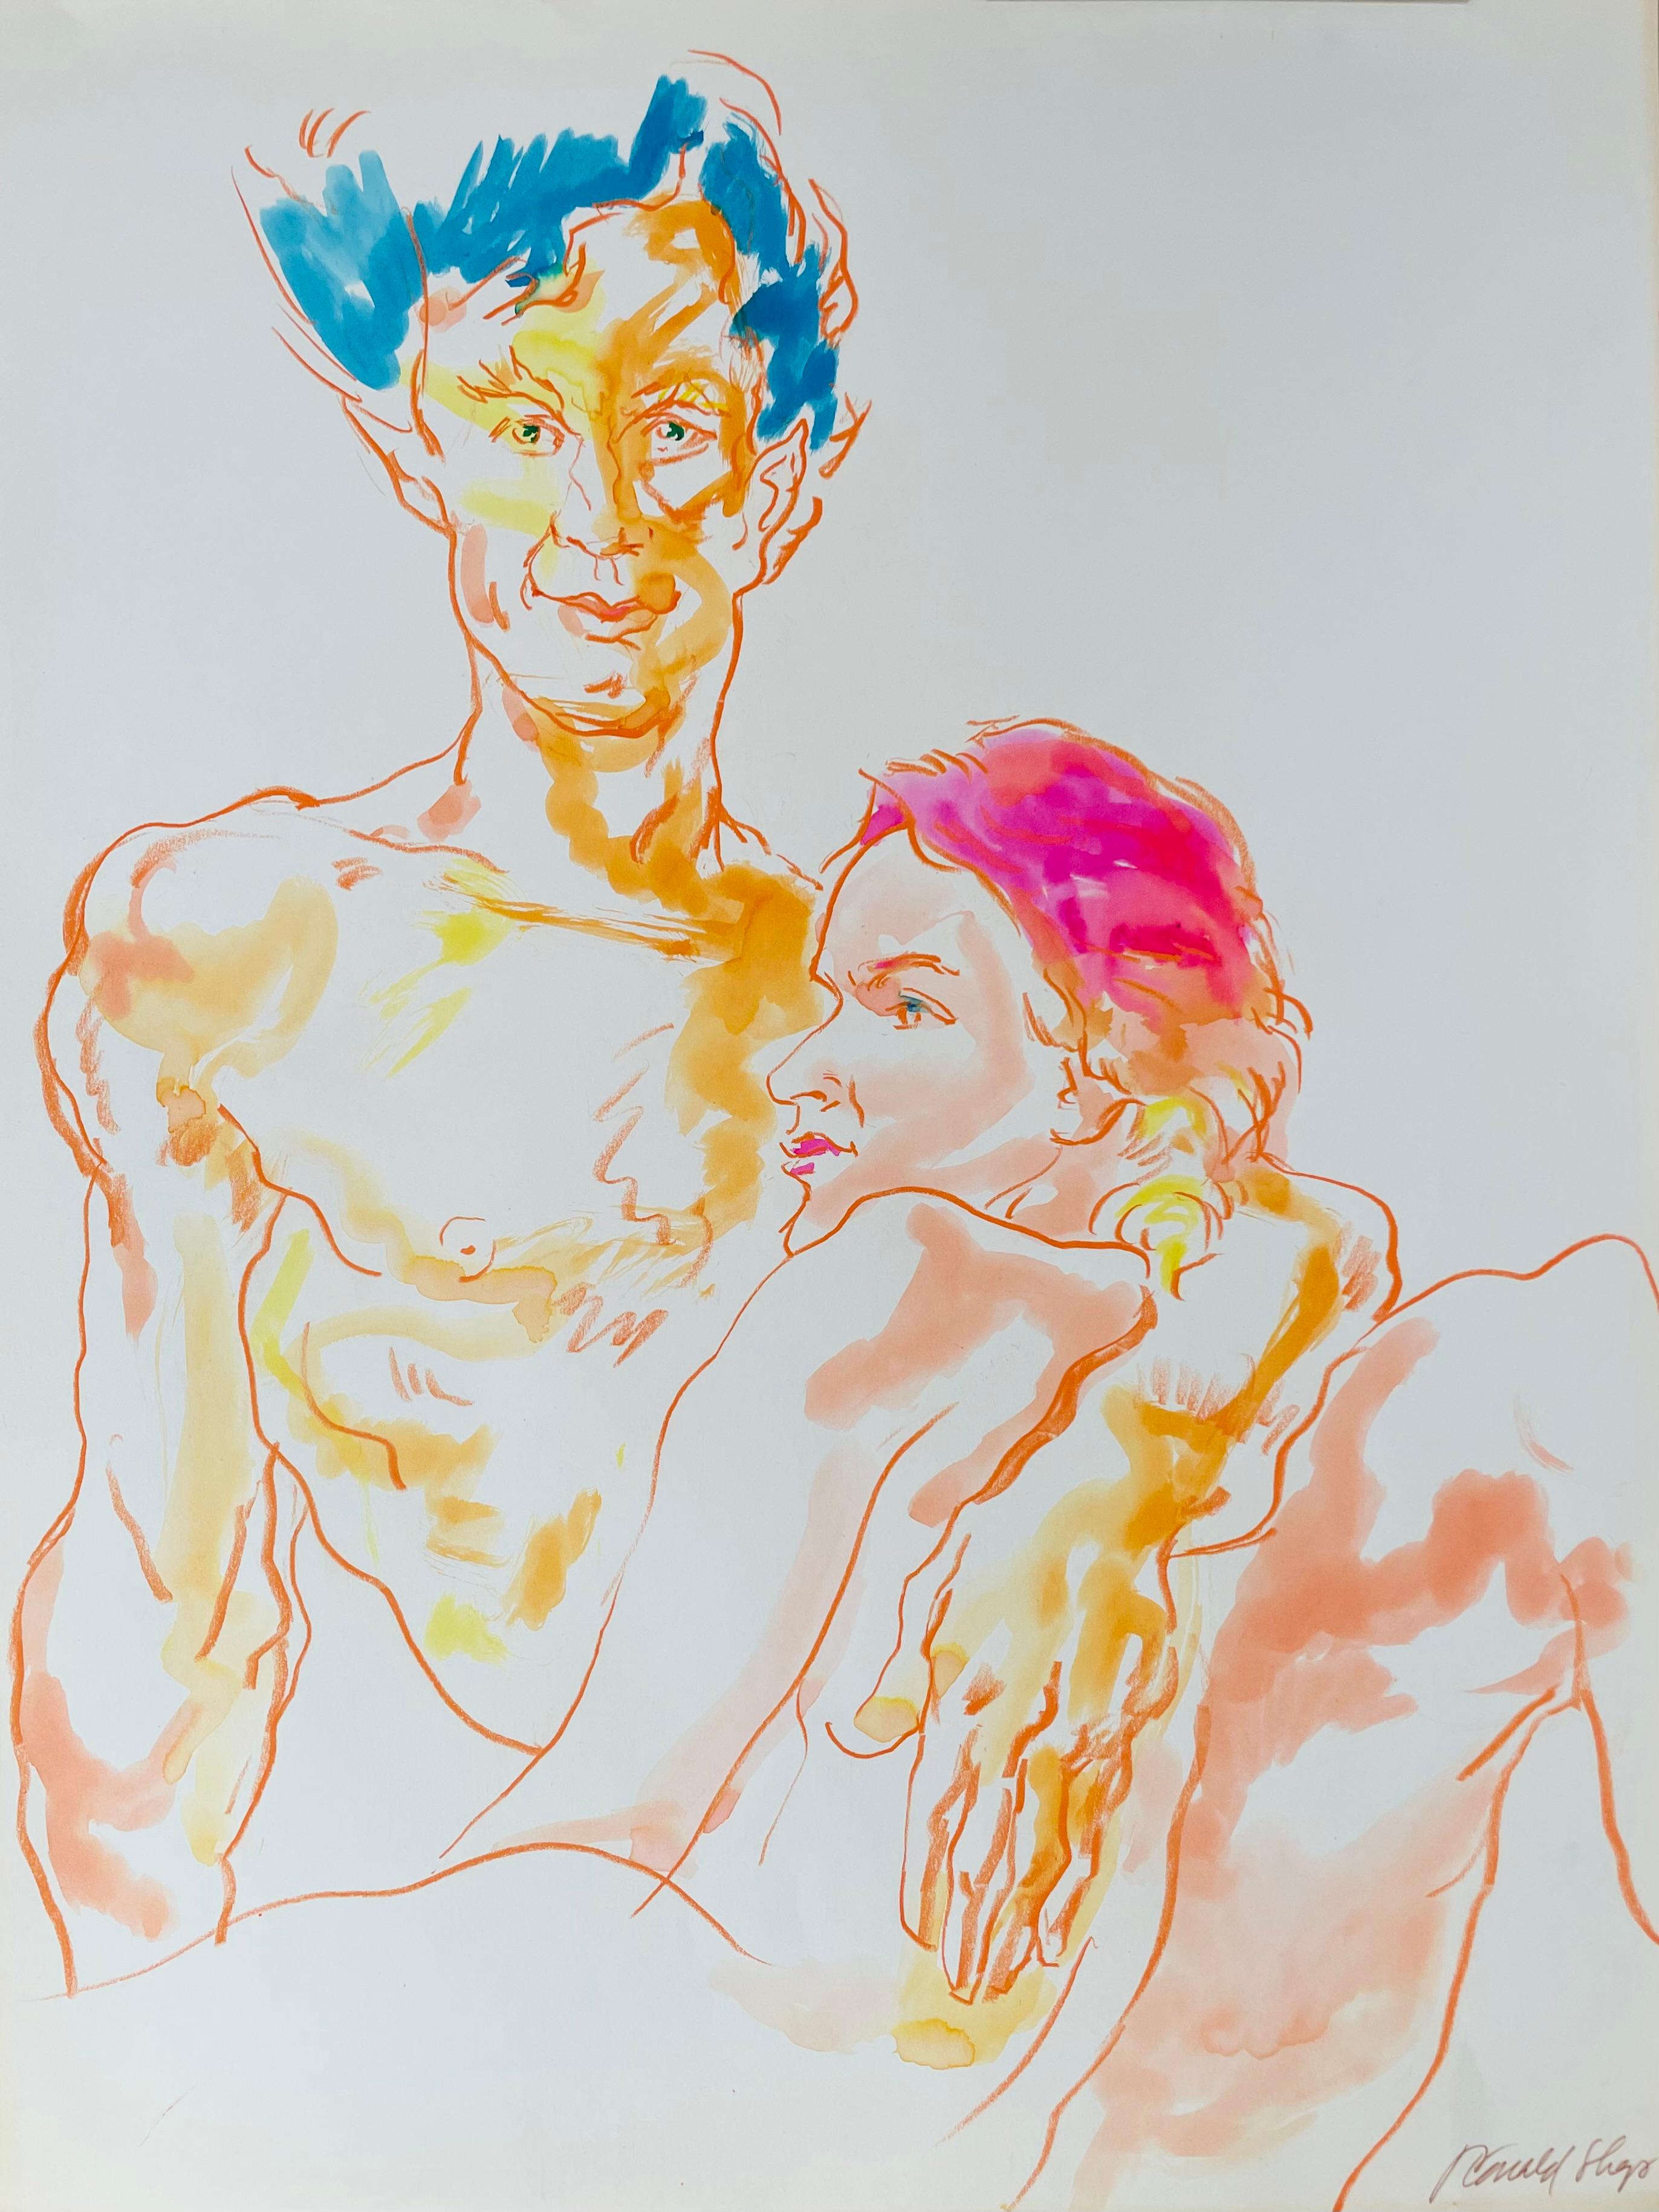 Original oil pastel and gouache figure drawing by celebrated, twentieth-century California landscape painter, Ronald Shap. Sketch of a nude man and woman with washes of neon blue and neon pink on paper. This is a part of Shap's '80s Interiors